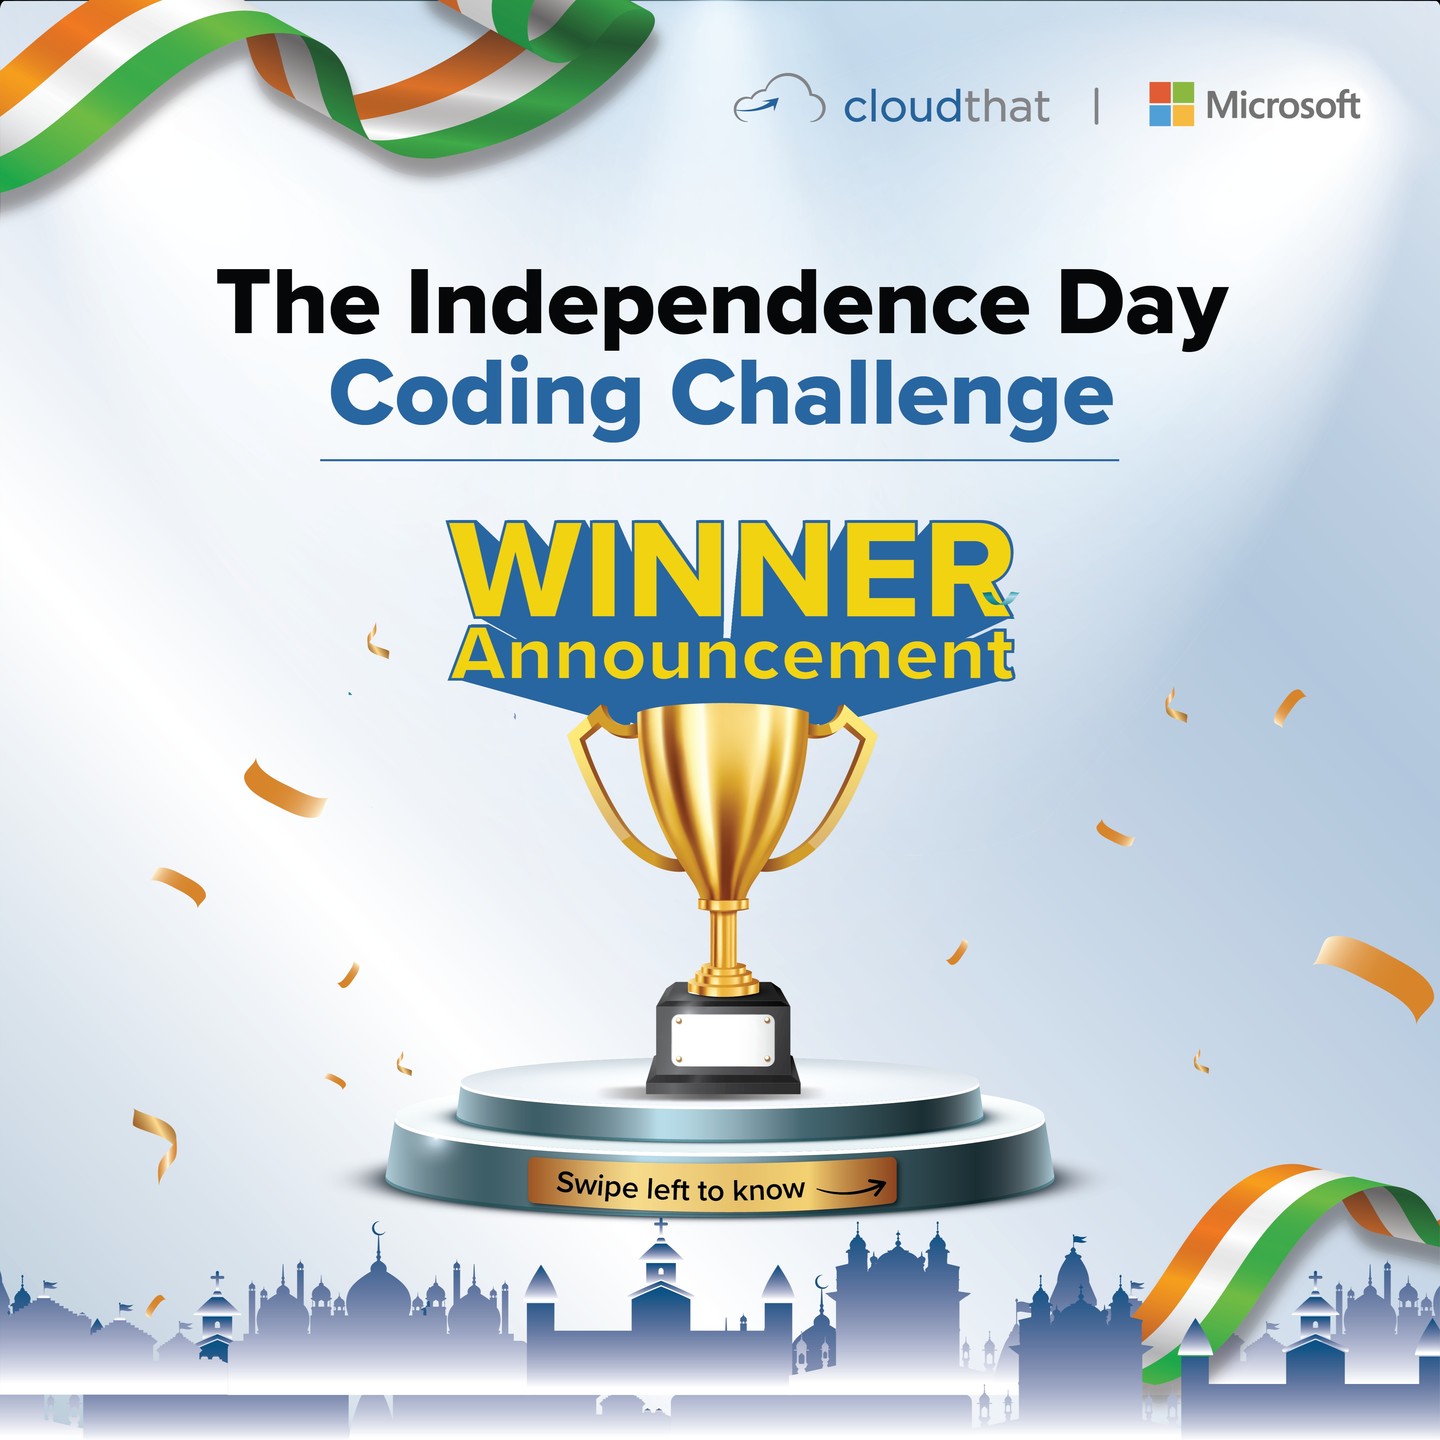 We're thrilled to announce the winners of our Independence Day Coding Challenge! Congratulations to @codewithaum & Chowdam Jaganath from @bitsince1979 for winning the challenge.

A big thanks to all the participants for their participation. Your dedication is inspiring! Stay tuned for more exciting contests.
@microsoft 

#IndependenceDayCodingContest #FreedomCodeChallenge #IndiaIndependenceHackathon #AzadiCodingCompetition #TricolorCodeFest #CodingForFreedom #ProudToCodeOnIndependenceDay #JaiHindCodeathon #IndependenceDayTechChallenge #DigitalFreedomHack #contest #contestalert #contestalertindia #giveaway #win #prize #earpods #contestannouncement #giveawayalert #contestgiveaway